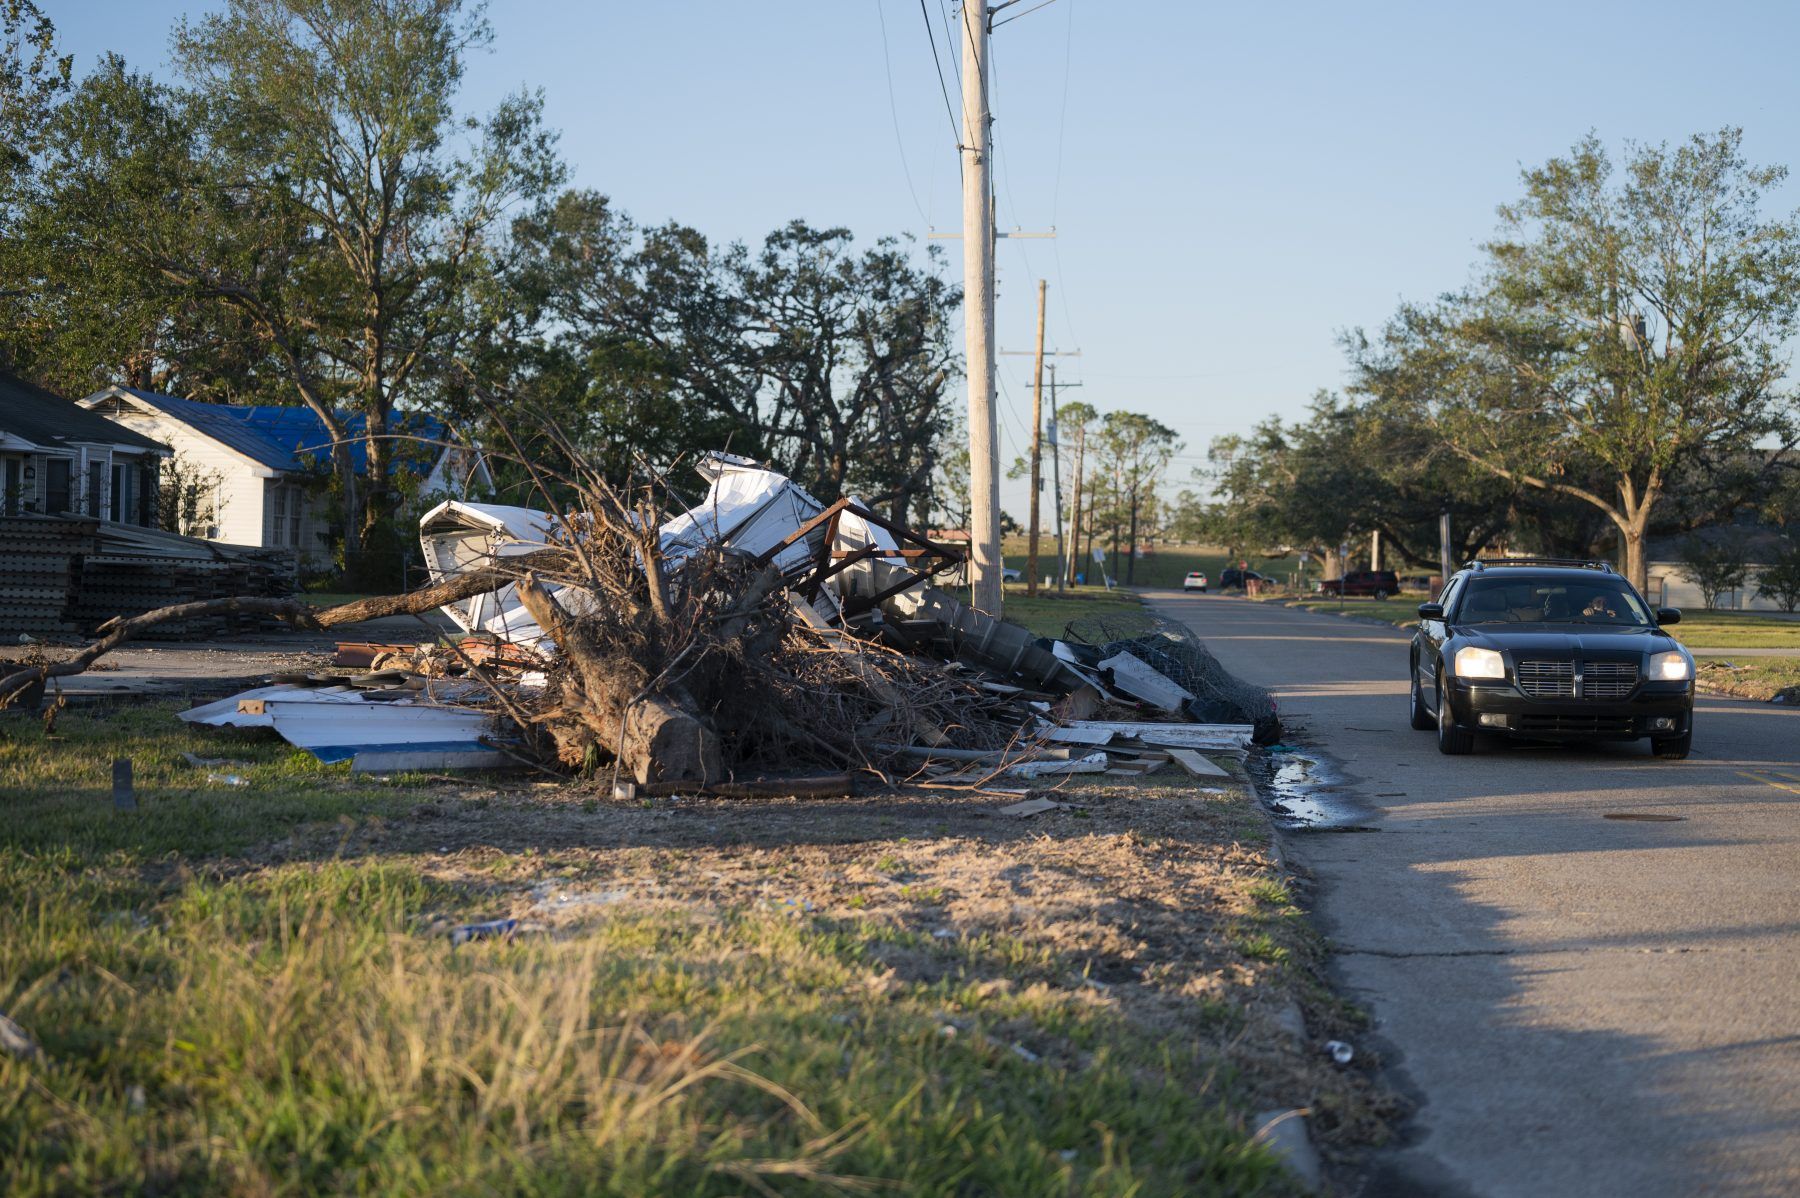 The destruction from back-to-back Hurricanes Laura and Delta remains vast in most neighborhoods of Lake Charles. The global pandemic has slowed recovery efforts. Image by Katie Sikora. United States, 2020.
